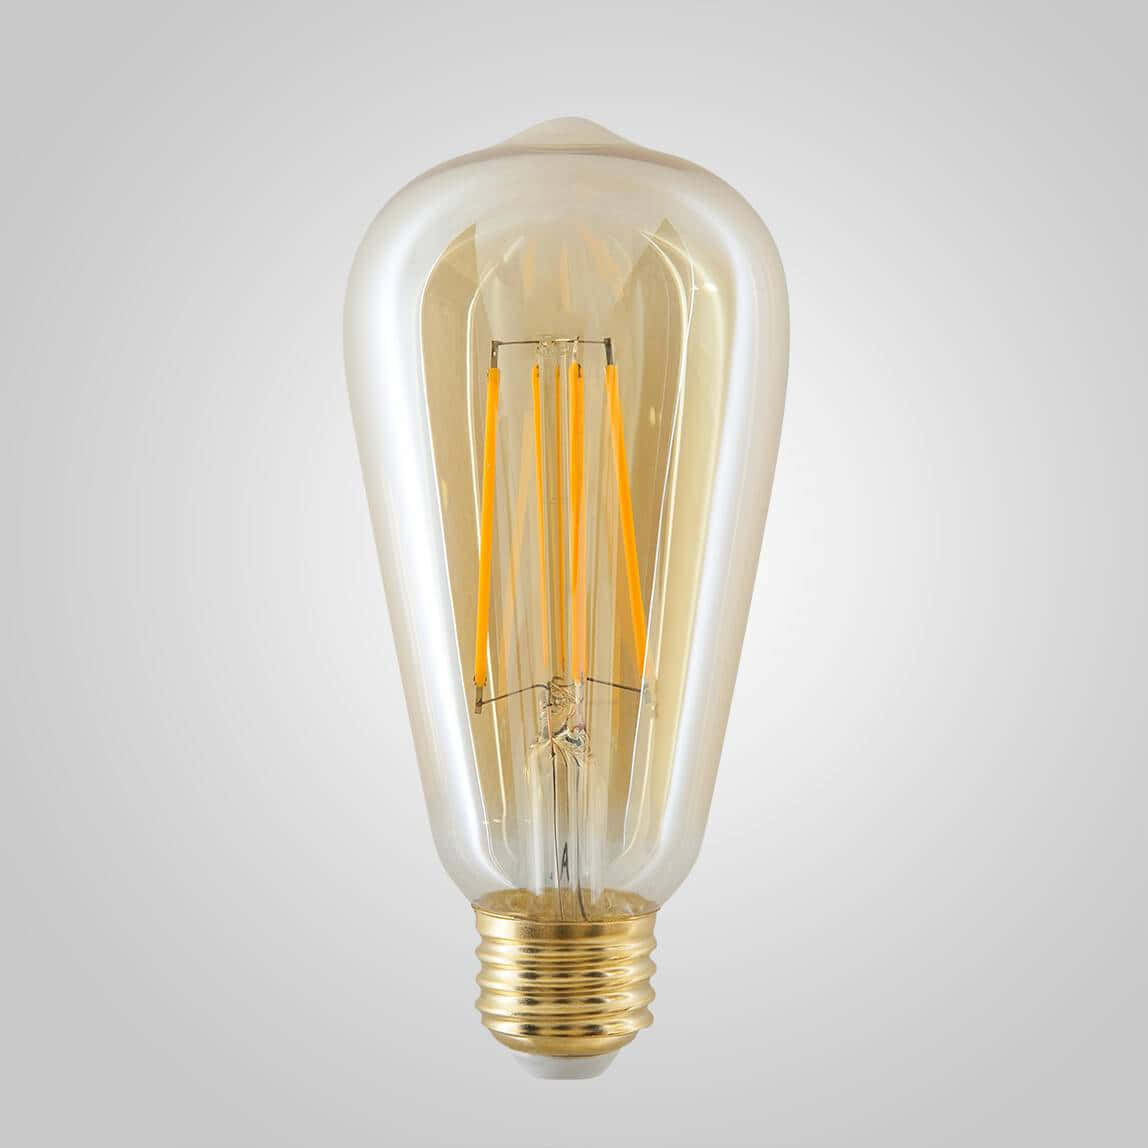 A Light Bulb With A Gold Filament